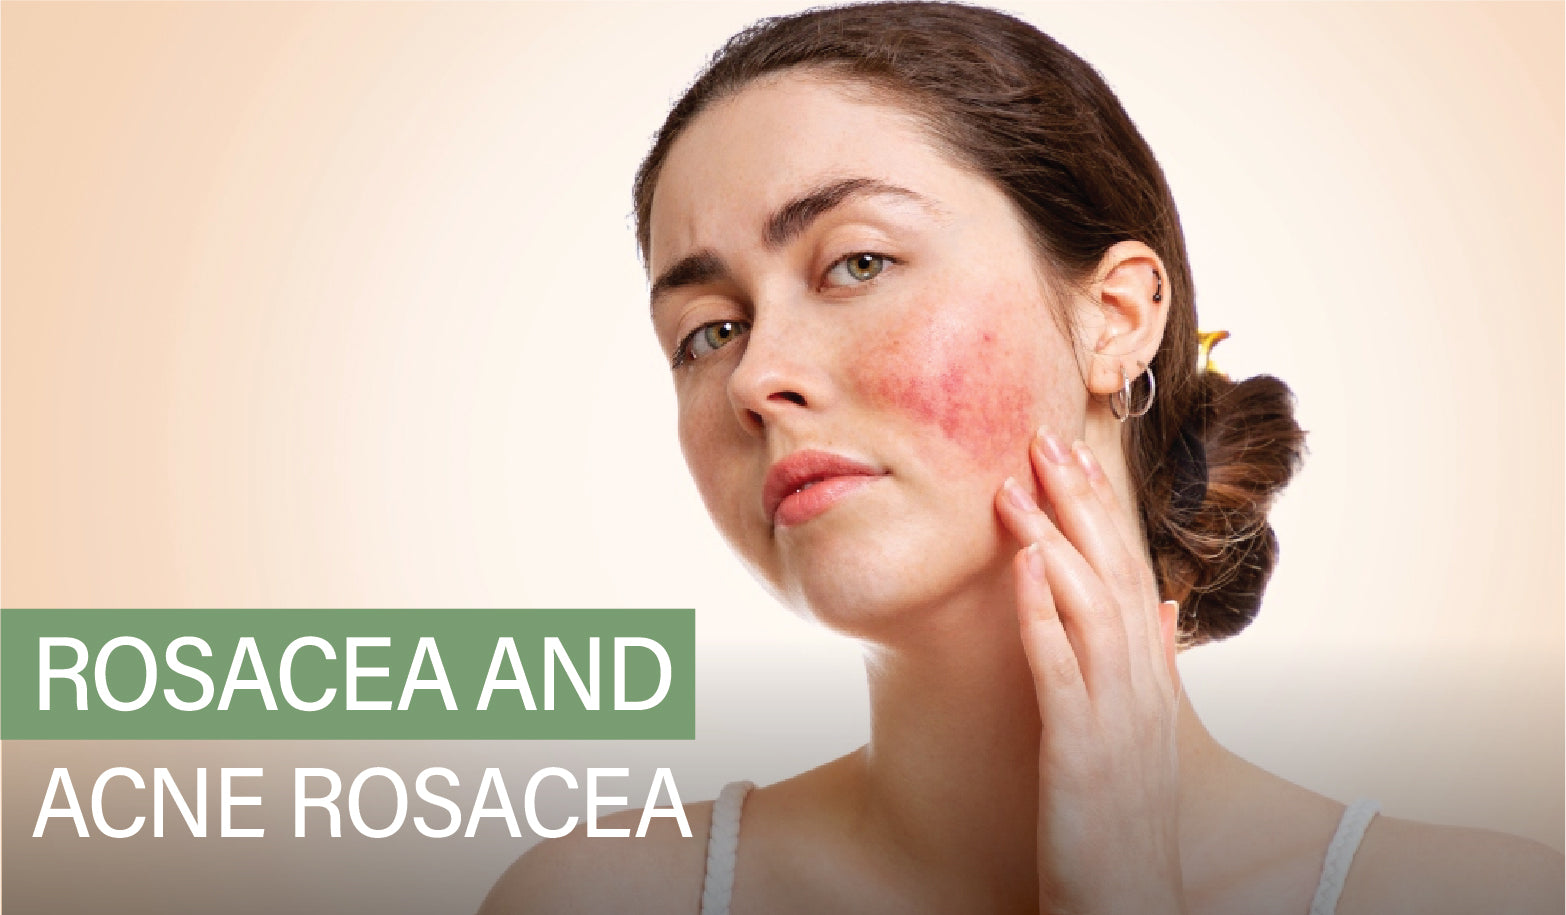 Rosacea and Acne Rosacea - What Do You Need To Know?